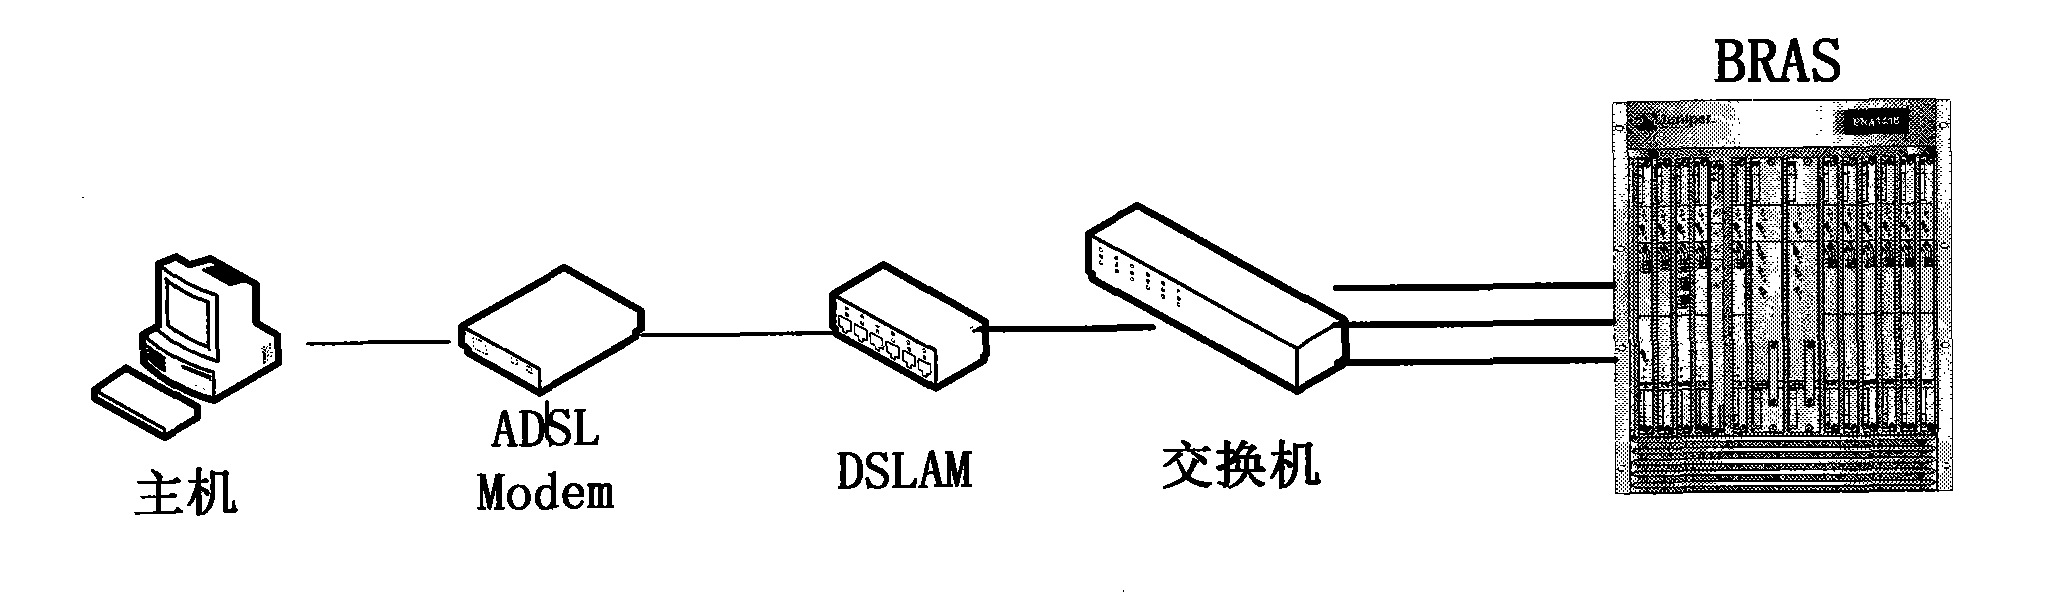 ADSL (Asymmetrical Digital Subscriber Line) dialing process monitoring and intelligent analyzing method